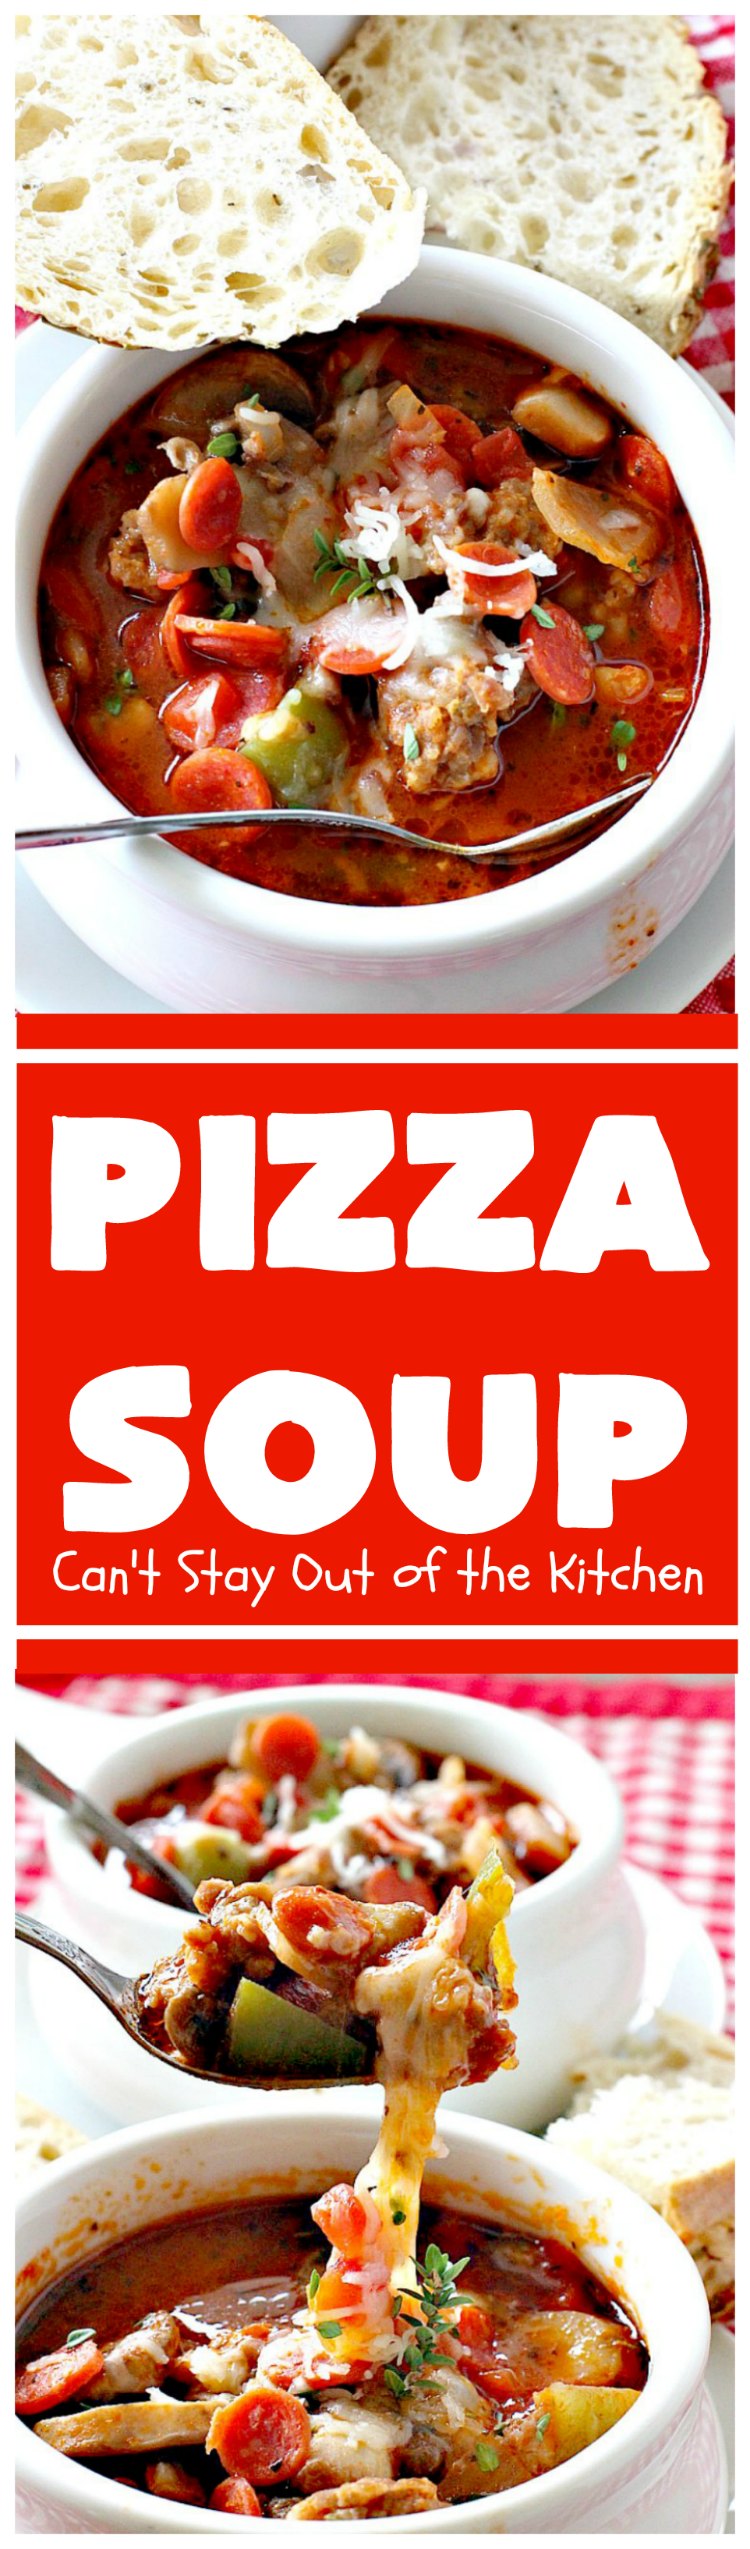 Pizza Soup | Can't Stay Out of the Kitchen